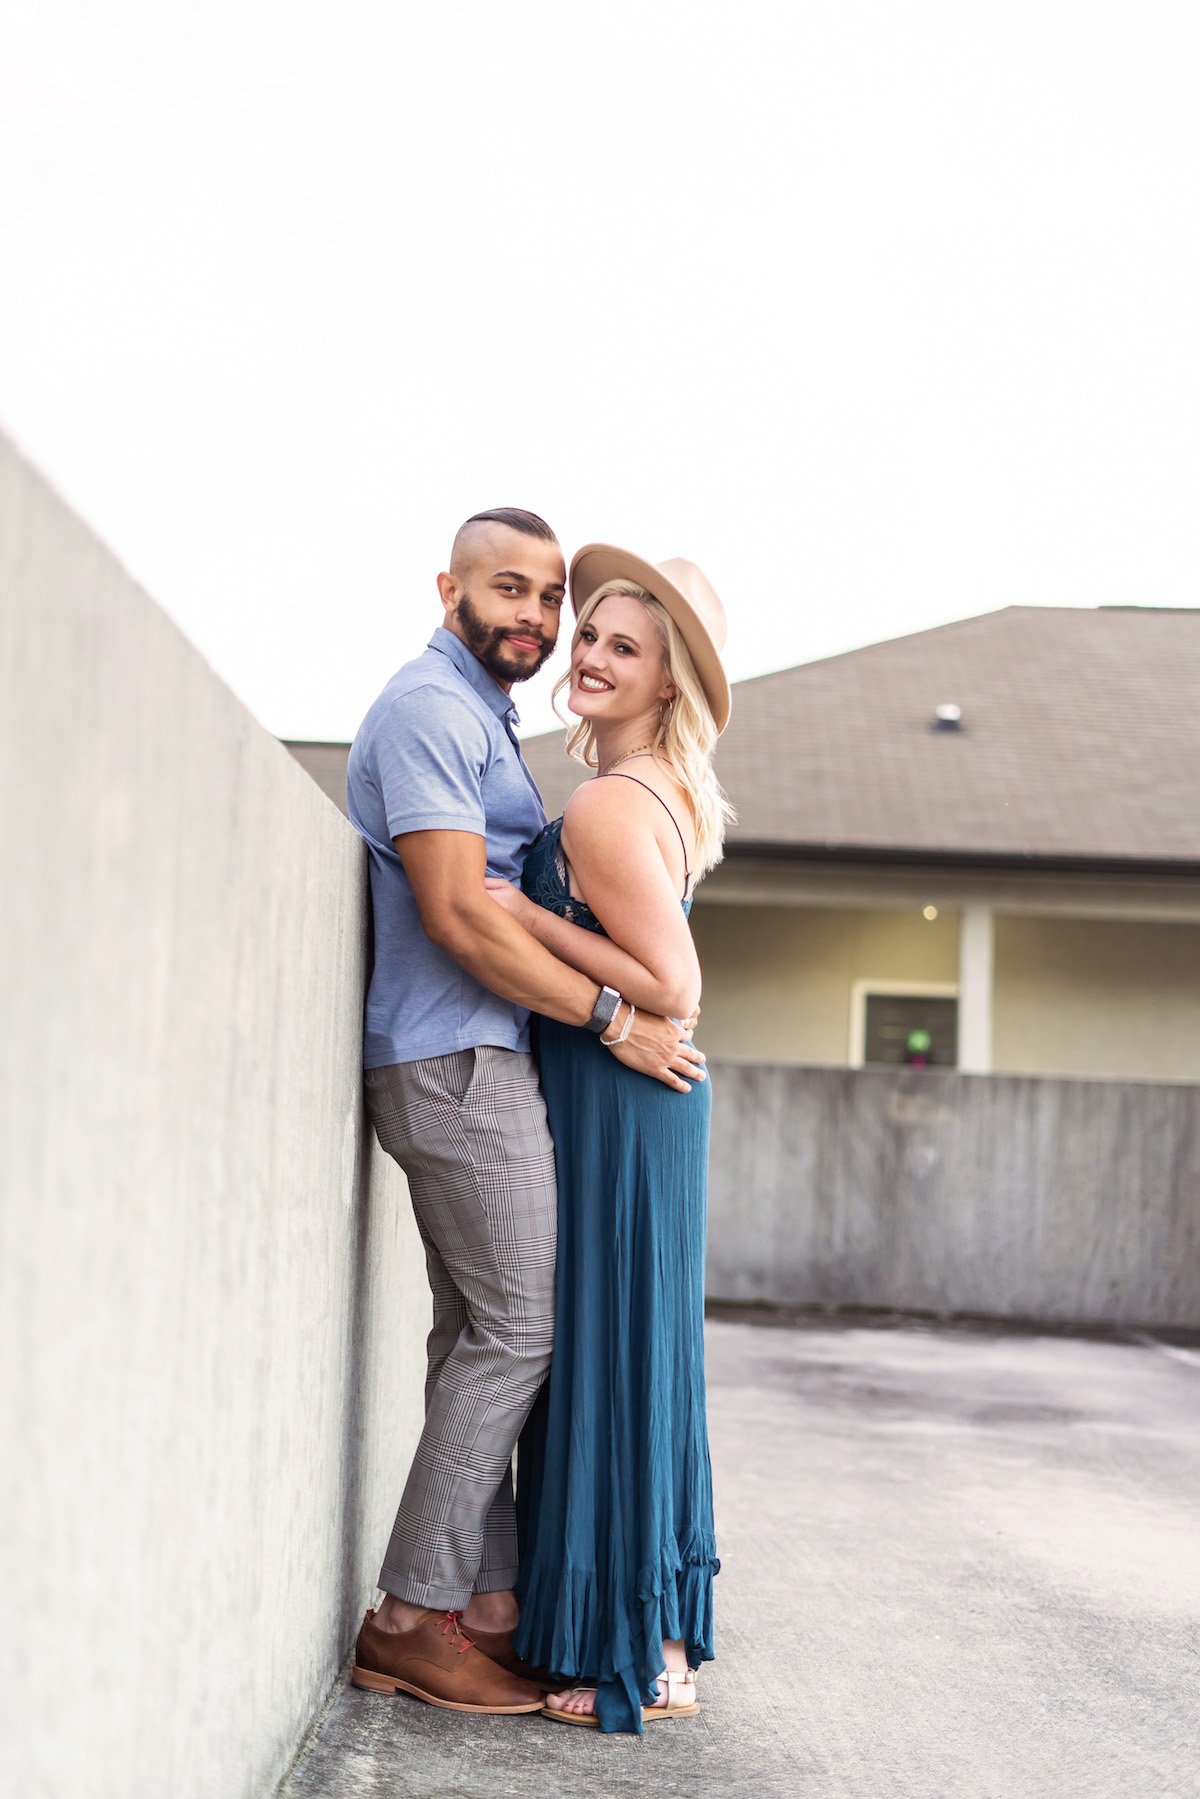 Ryan and Clara from 'Married at First Sight' Season 12 embracing